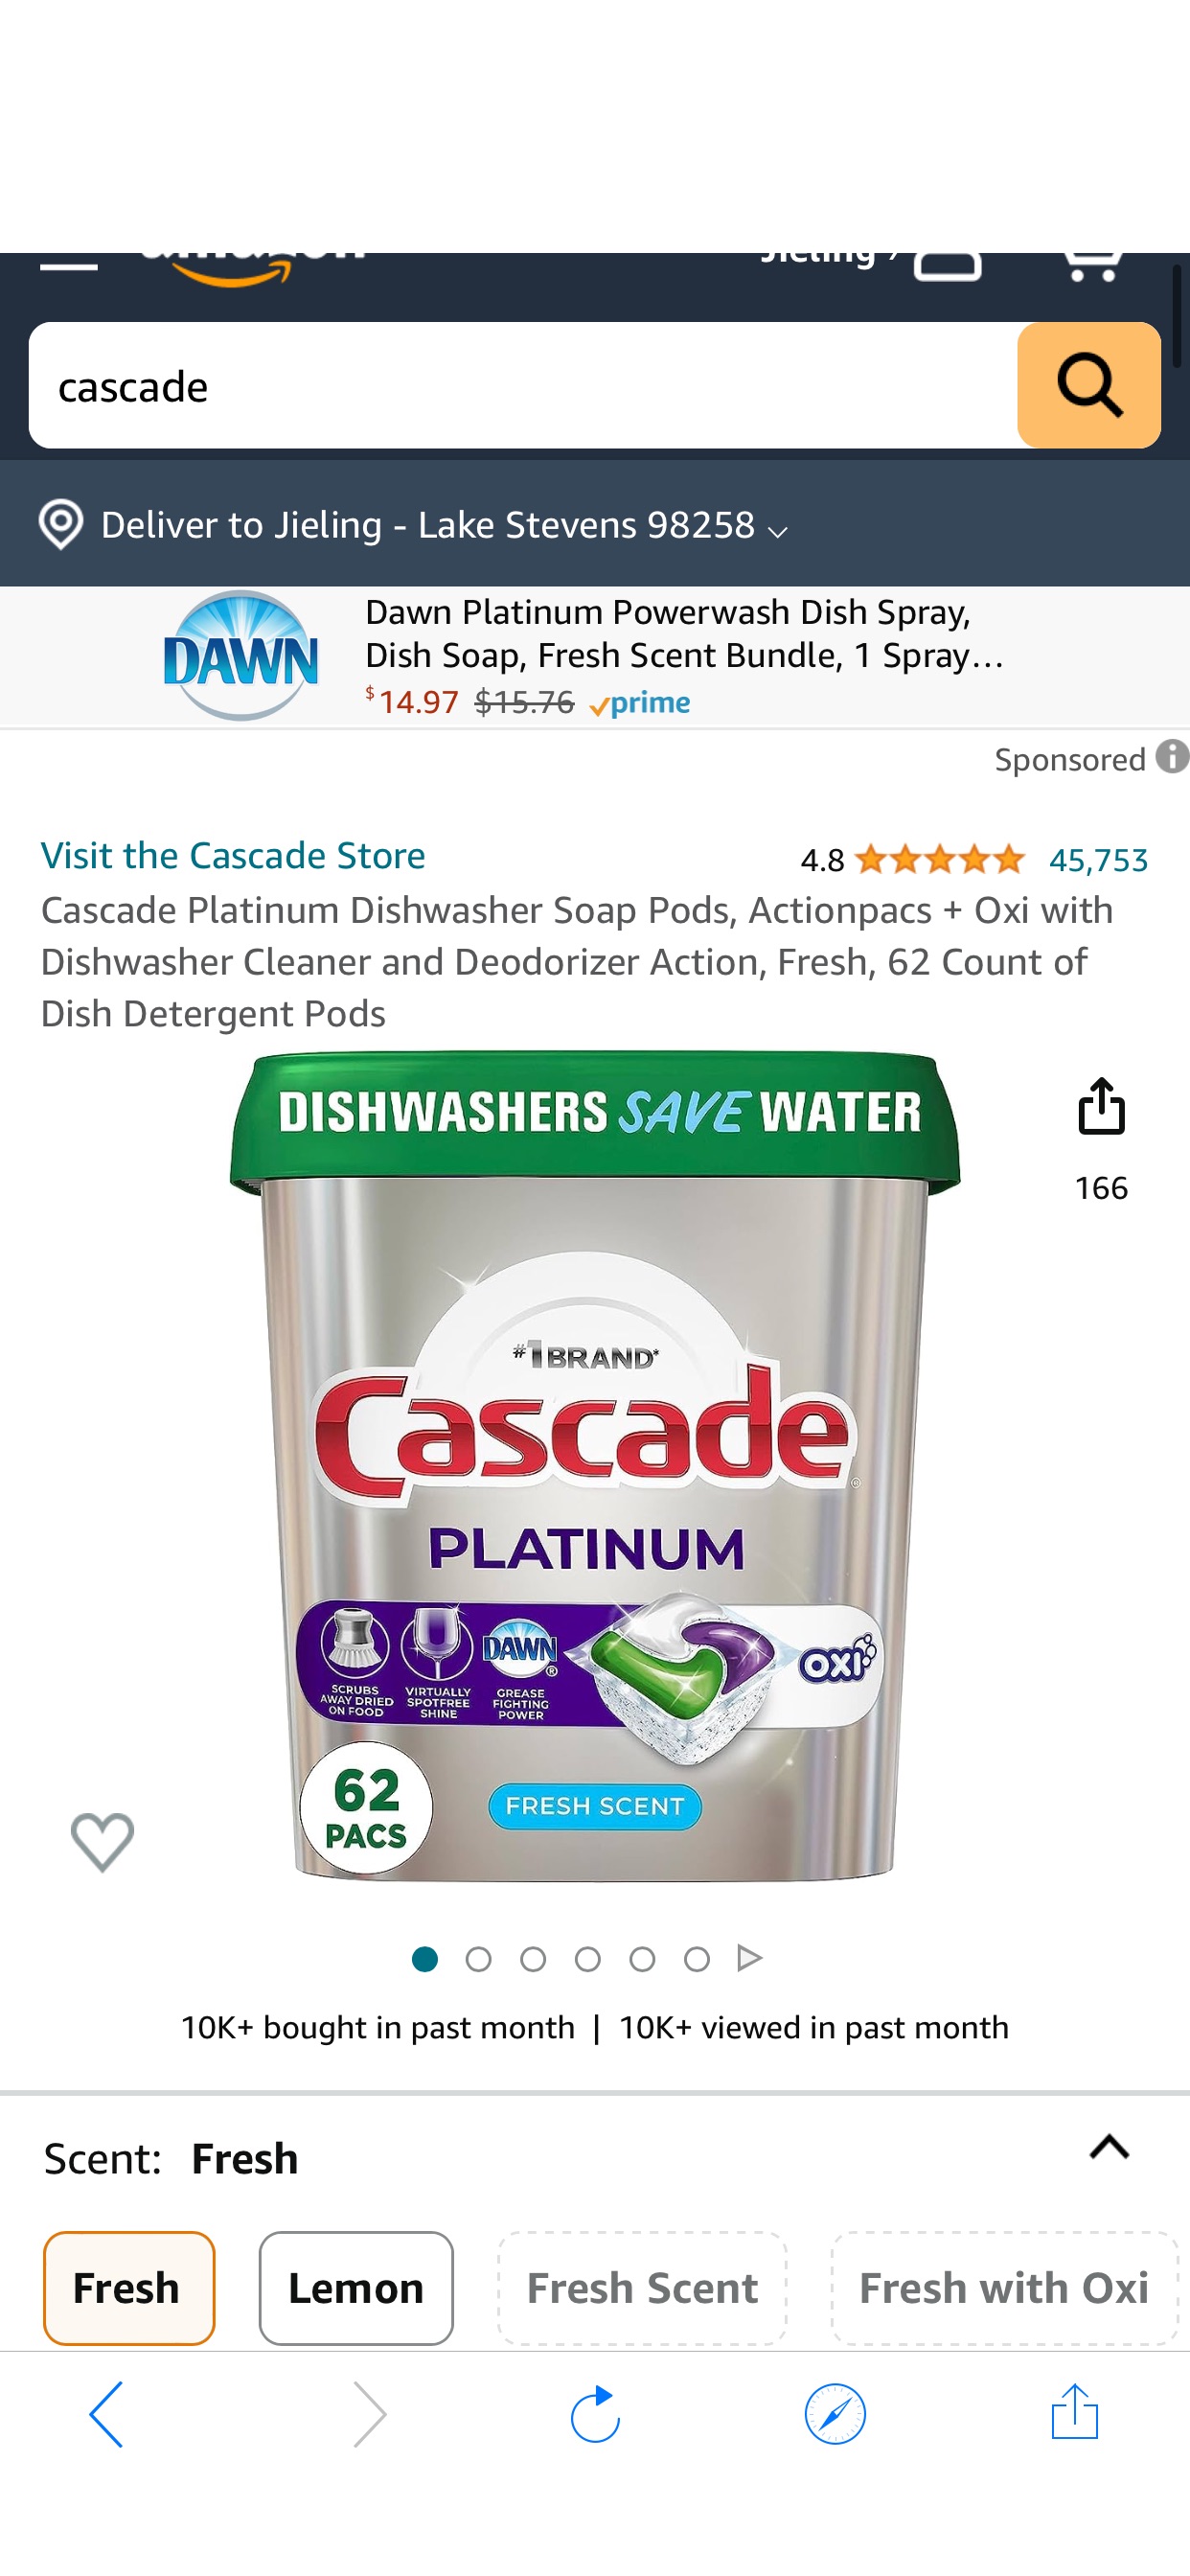 Amazon.com: Cascade Platinum Dishwasher Soap Pods, Actionpacs + Oxi with Dishwasher Cleaner and Deodorizer Action, Fresh, 62 Count of Dish Detergent Pods : Health & Household